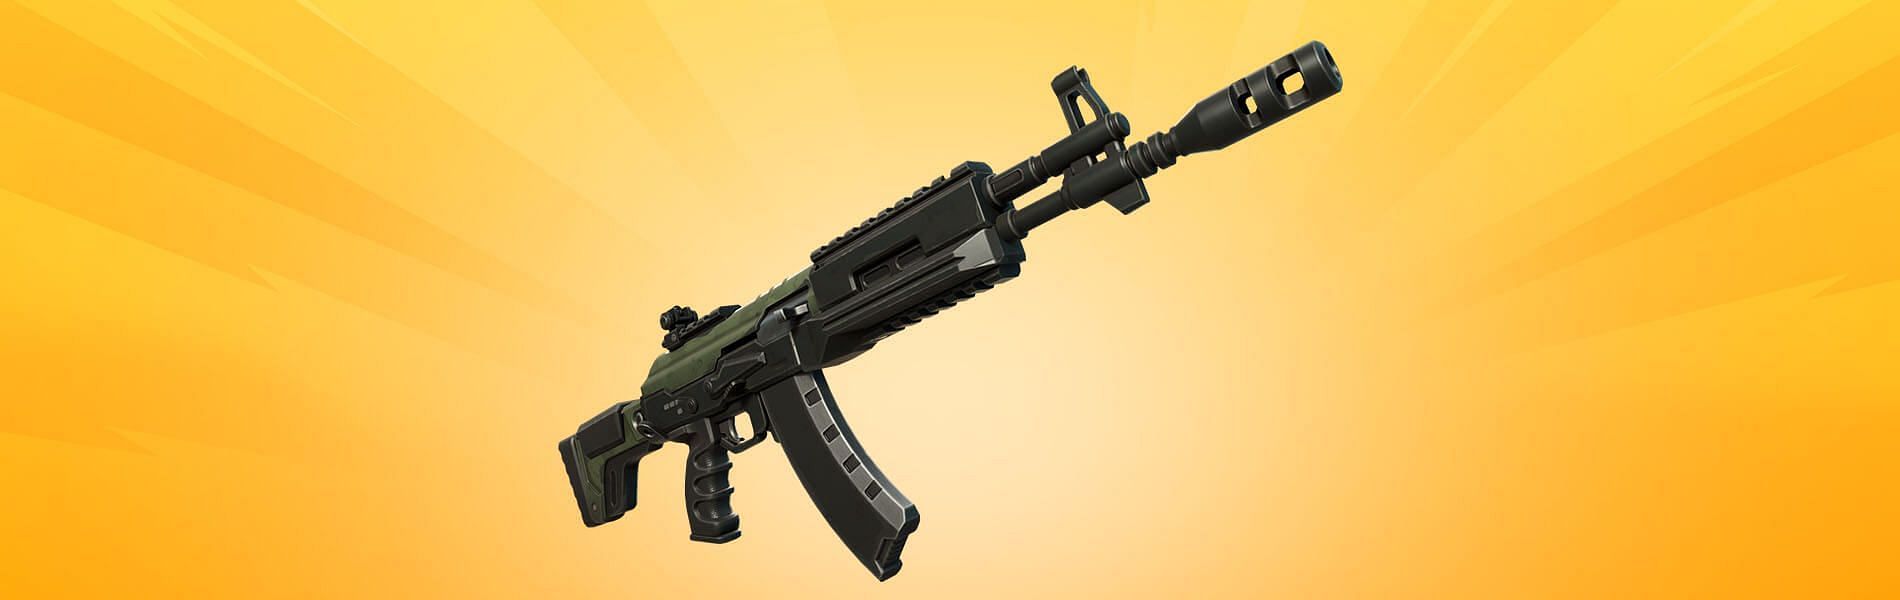 The rifle offers a versatile shooting experience (Image via Epic Games)